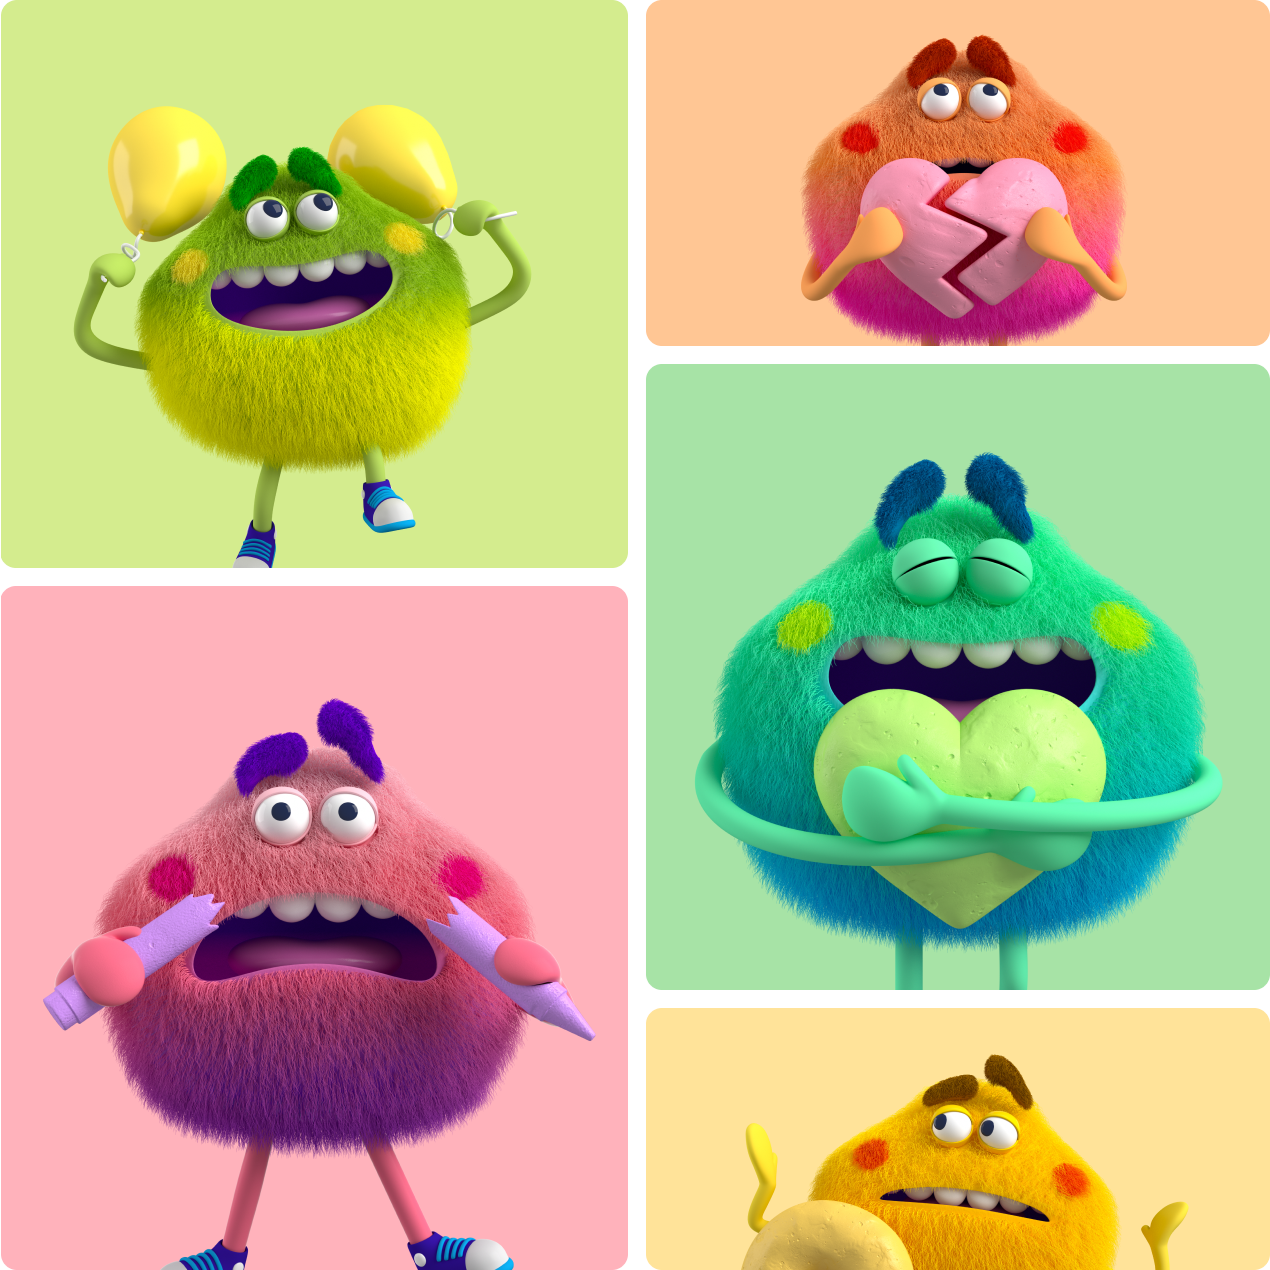 Collage of five Feelings Monsters. Green and Yellow Feelings Monster smiling and holding two balloons. Orange Feelings Monster looking sad holding a broken heart. Green Feelings Monster happy and hugging a green heart. Pink Feelings Monster looking shocked holding a broken crayon. Yellow Feelings Monster shrugging.